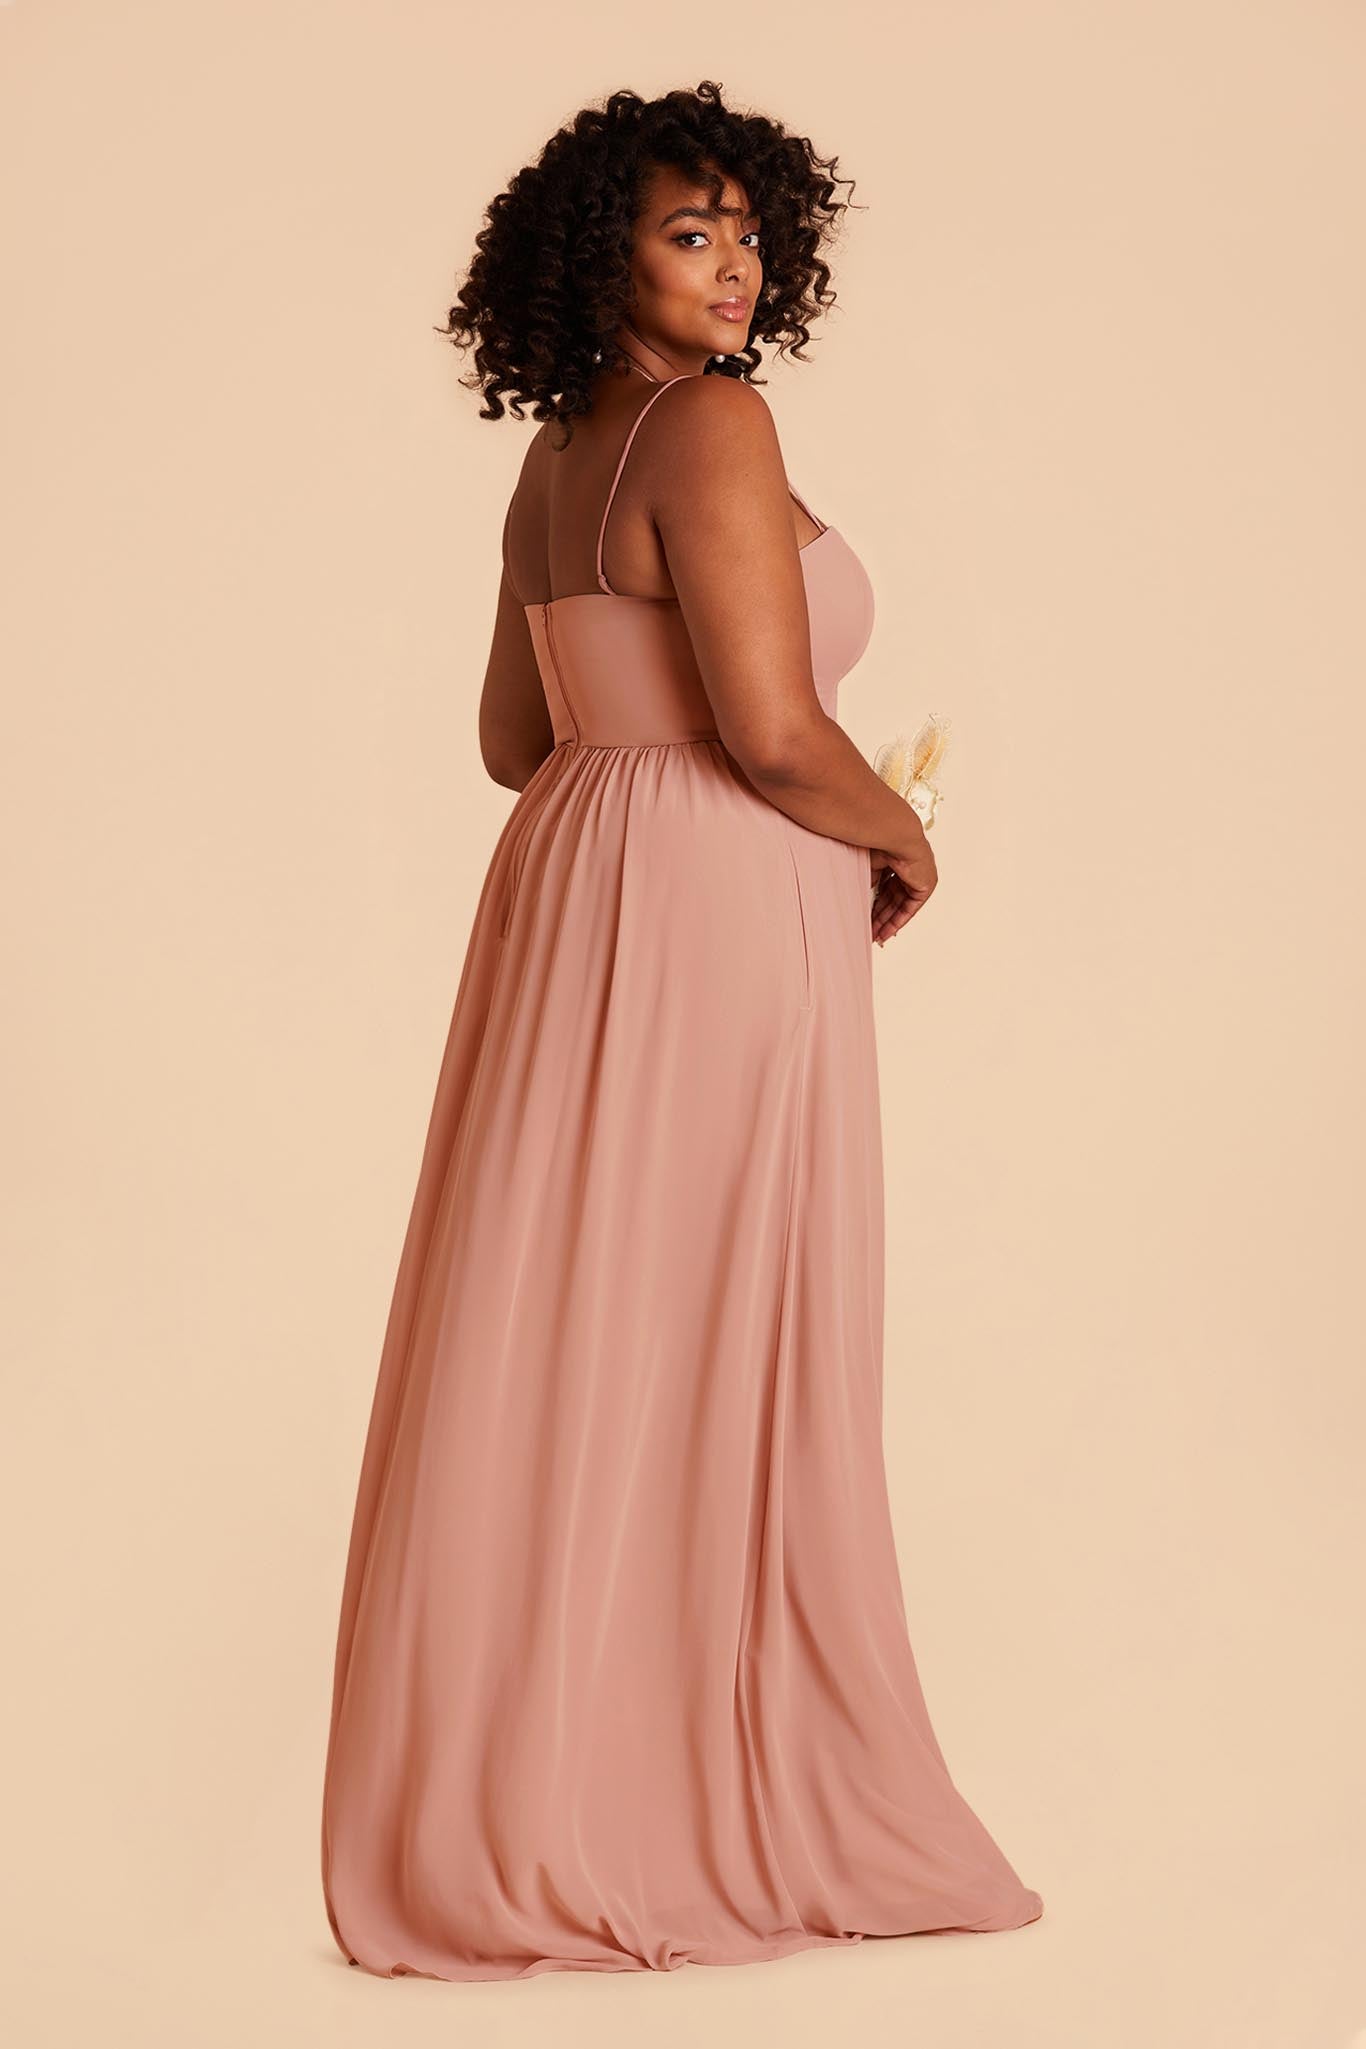 Dusty Rose August Convertible Dress by Birdy Grey